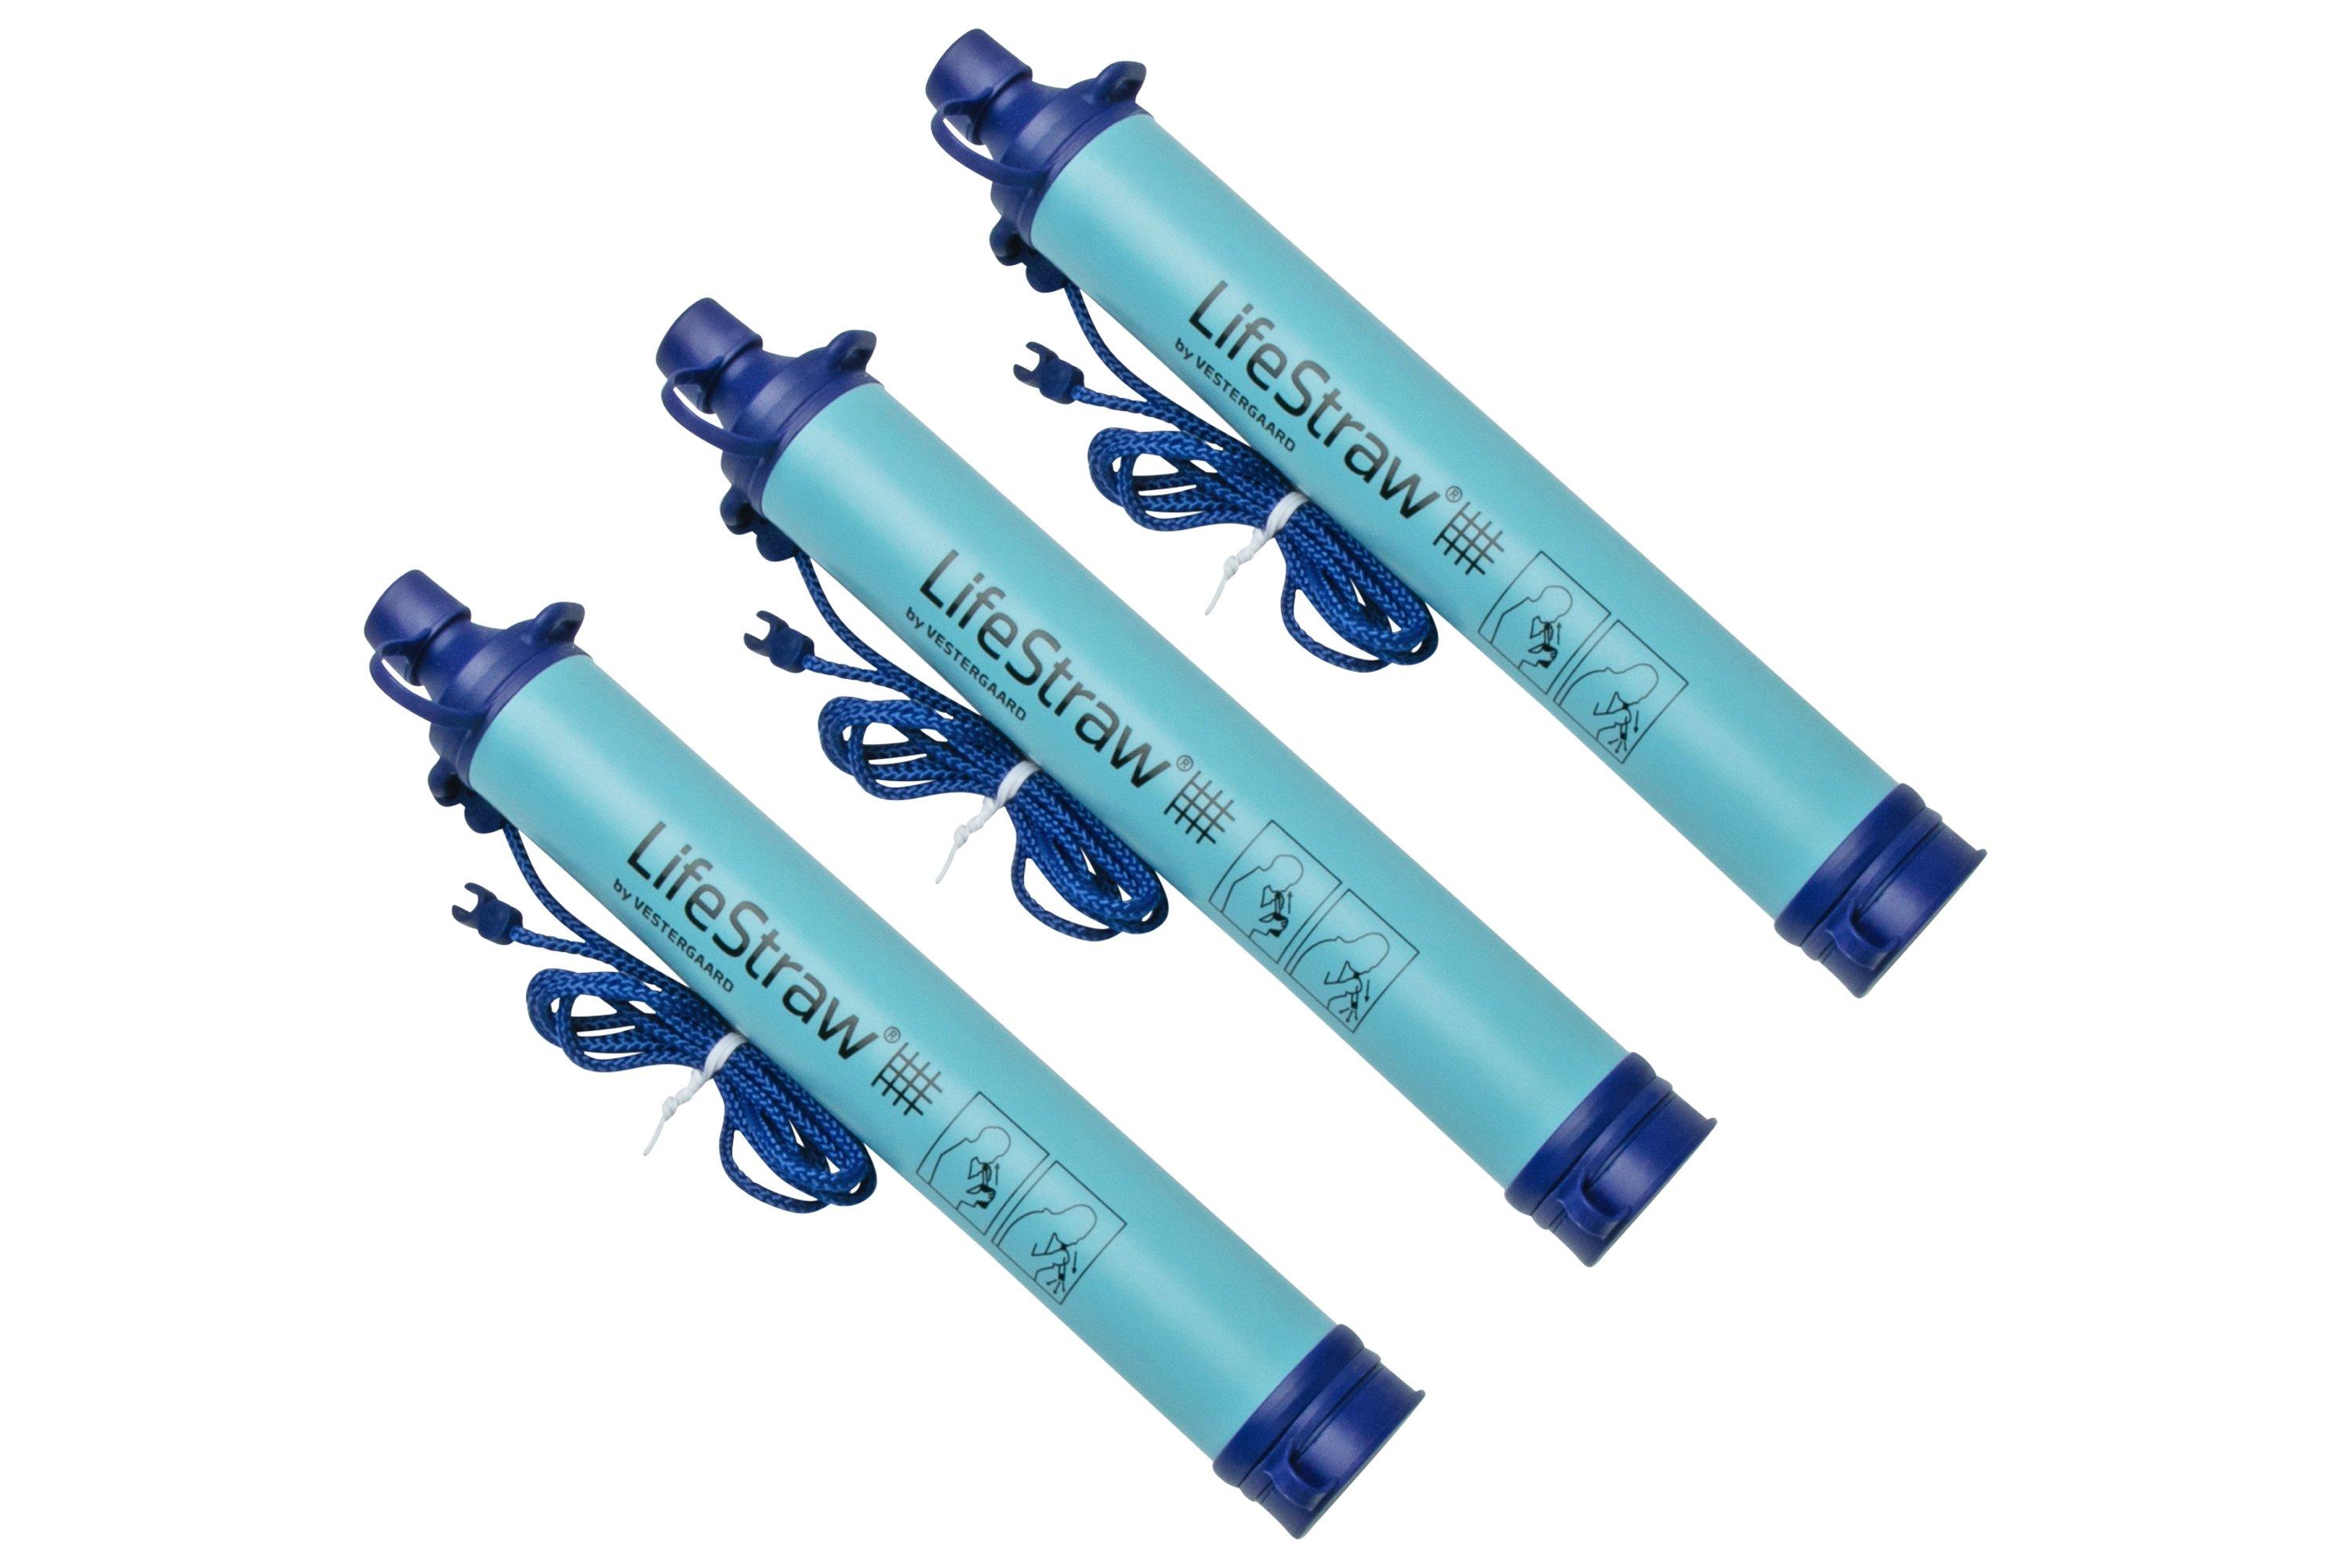 The LifeStraw – A Personal Water Filter For The Great Outdoors